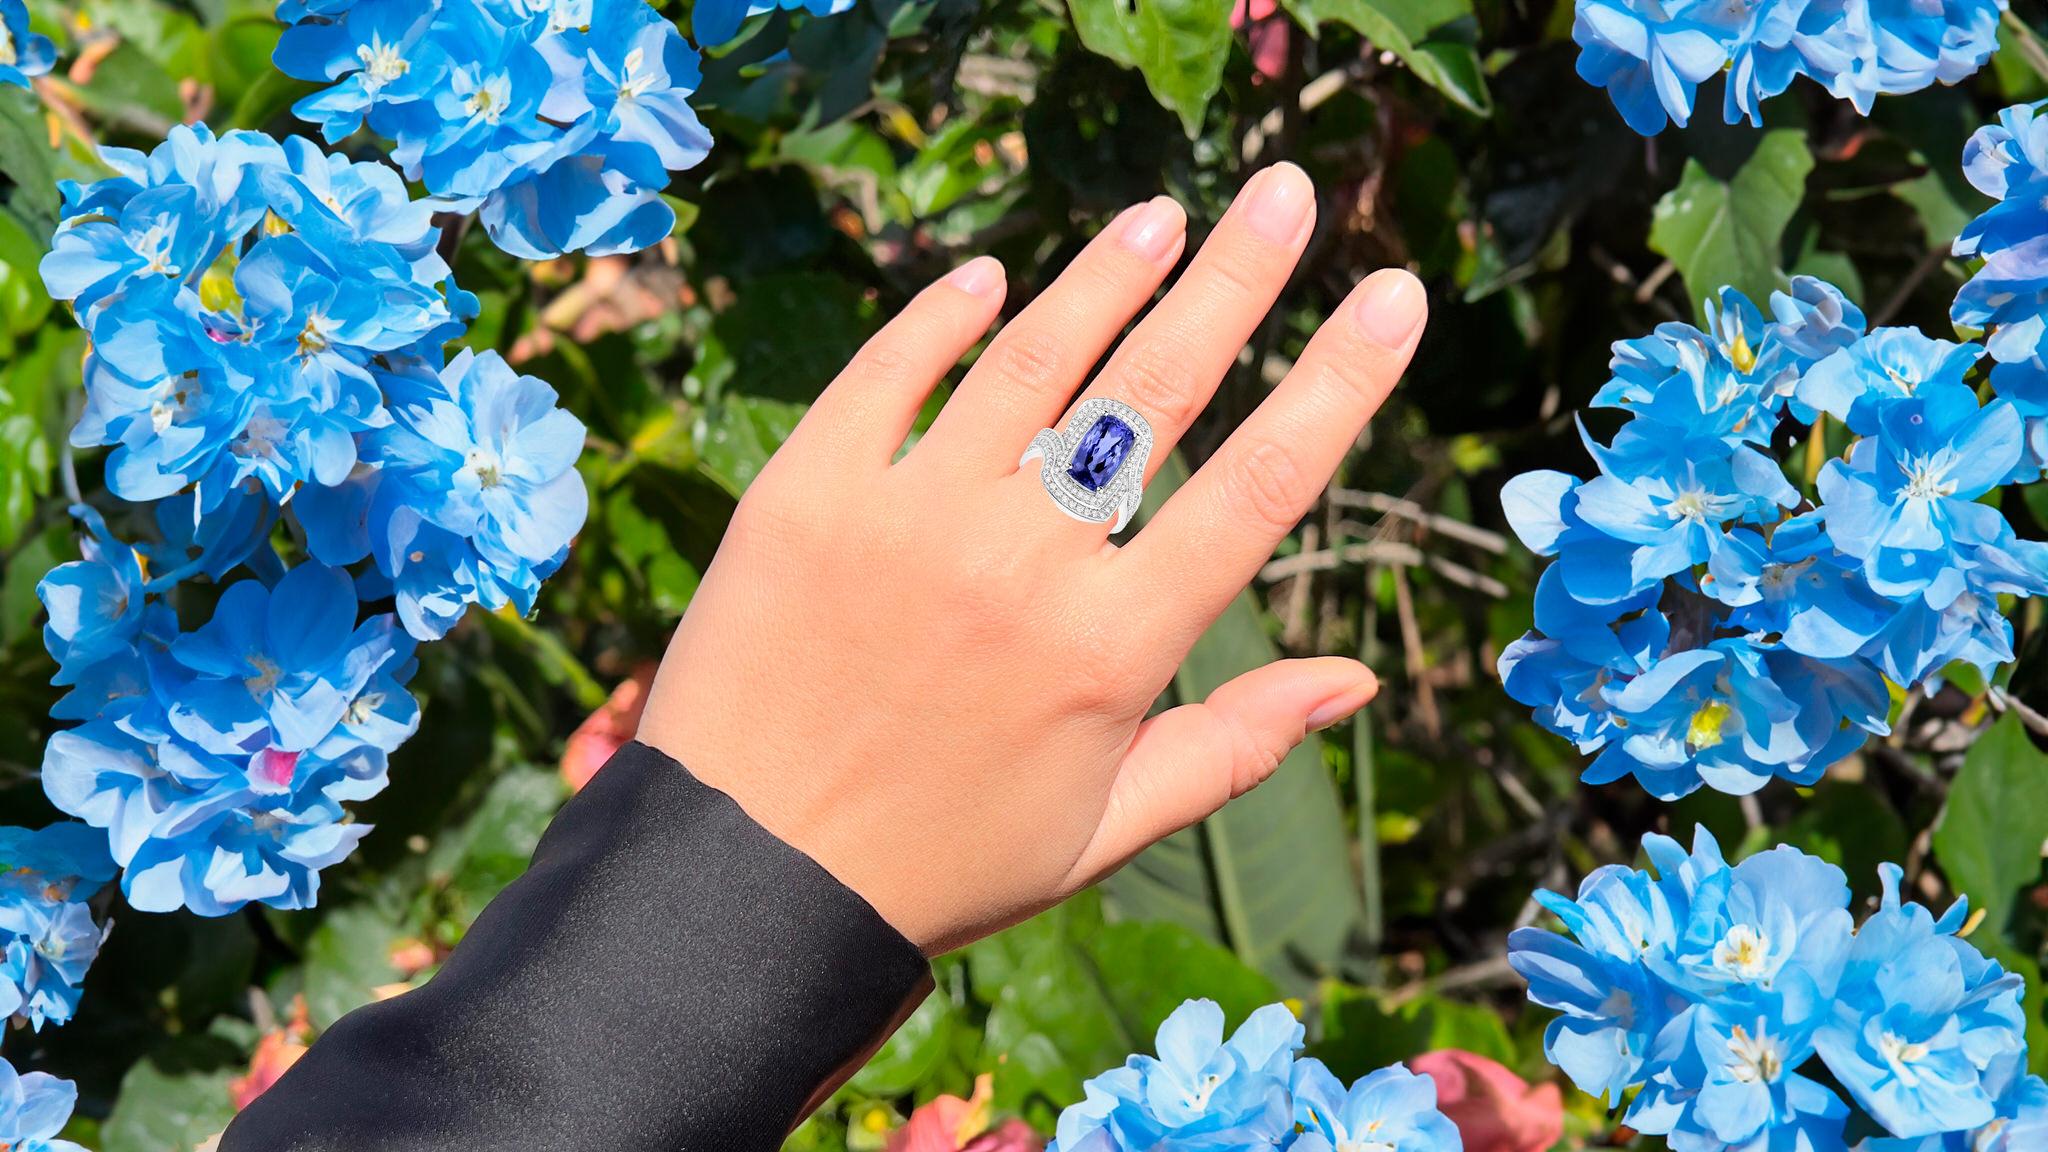 It comes with the Gemological Appraisal by GIA GG/AJP
All Gemstones are Natural
Tanzanite = 5.85 Carats
128 Diamonds = 0.78 Carats
Metal: 14K White Gold
Ring Size: 7* US
*It can be resized complimentary